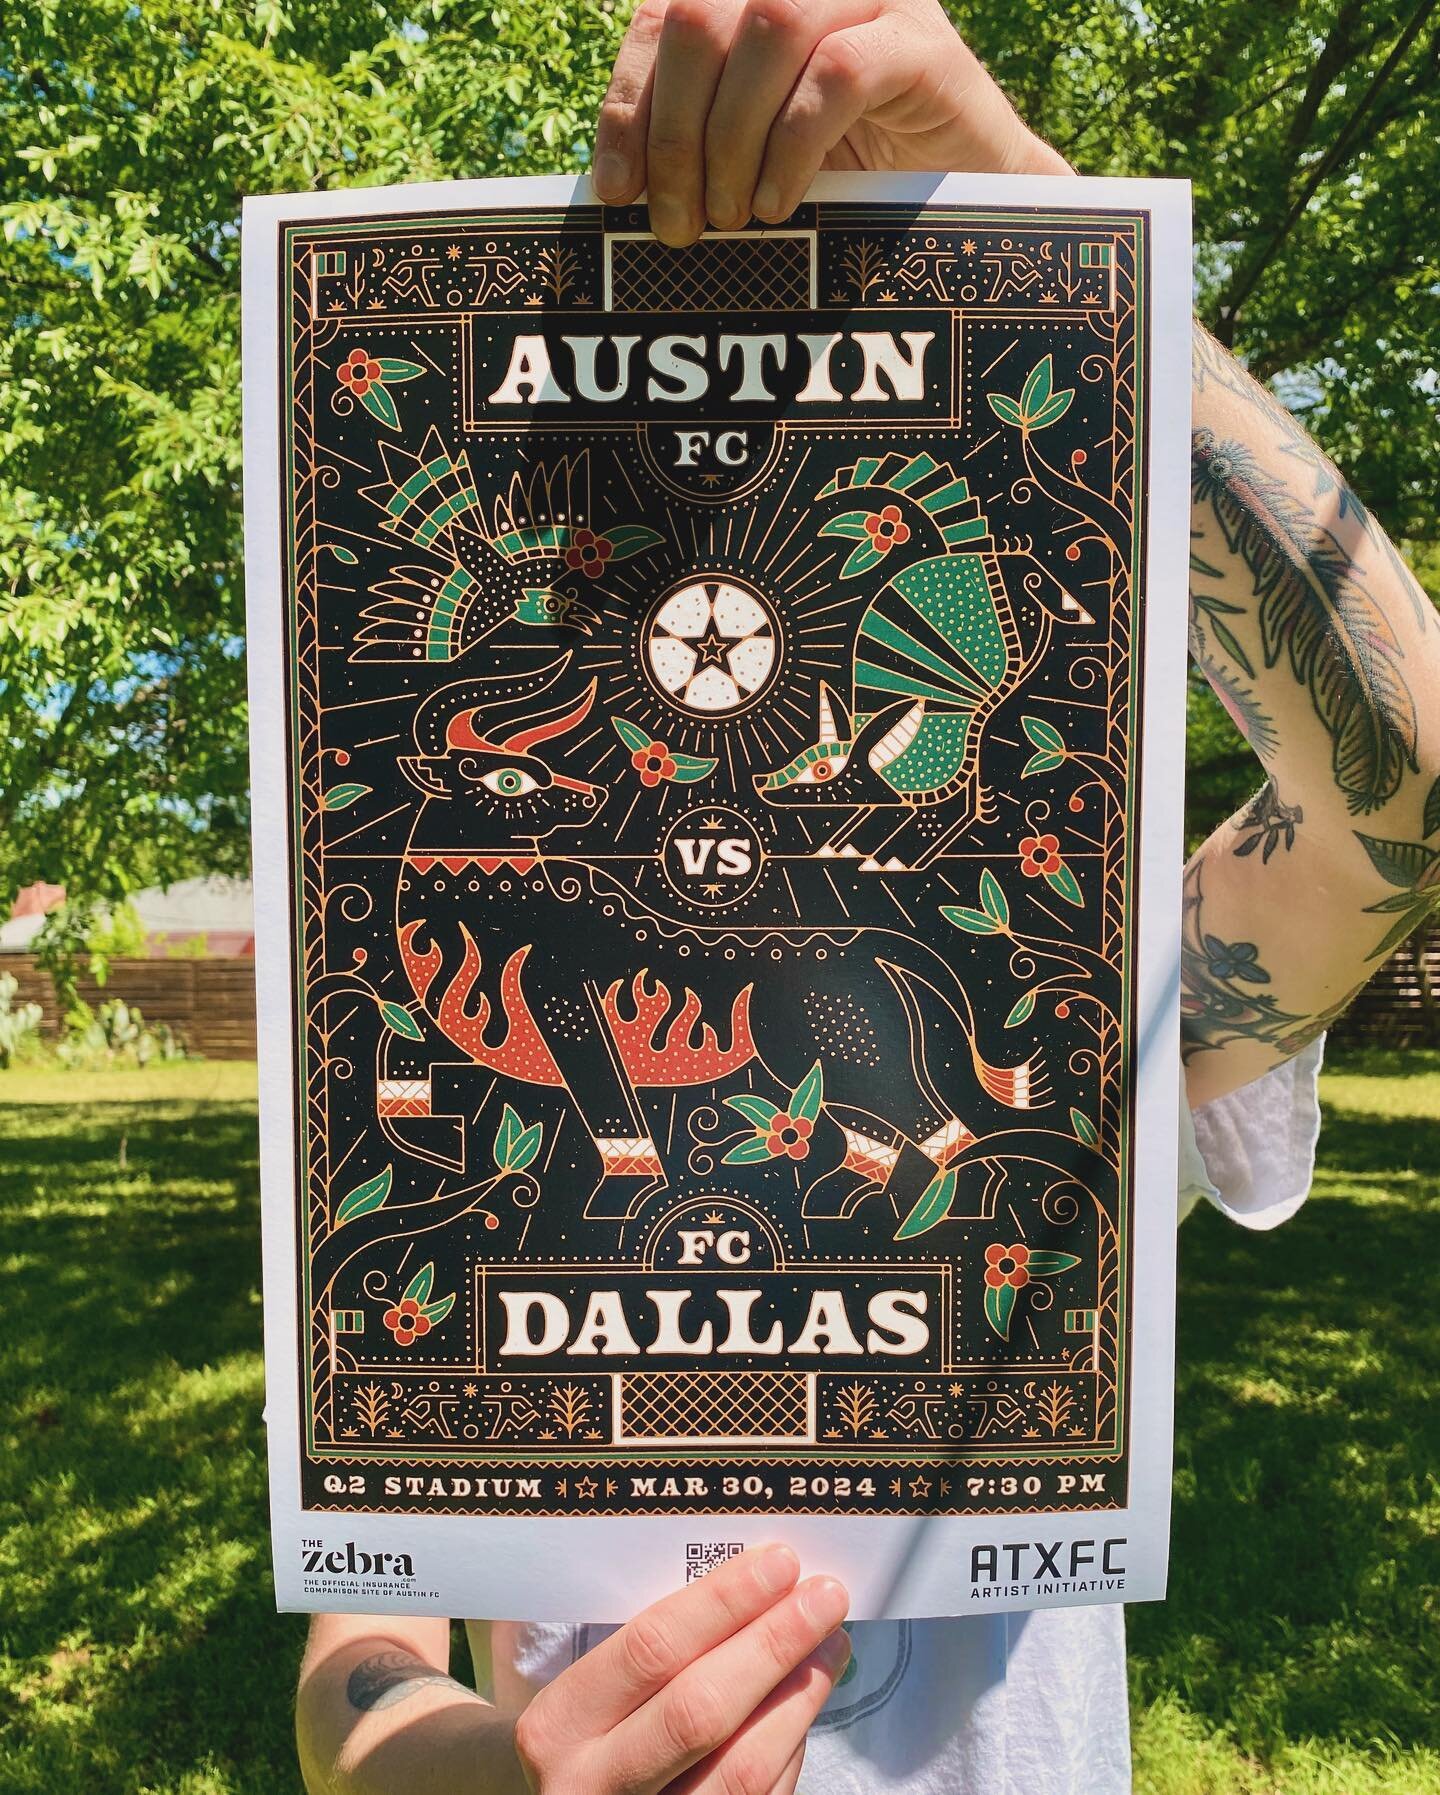 the only thing better than making the latest @austinfc poster was getting the first W of the year against dallas. appreciate all the love on this one!
.
.
.
.
#austinfc #listos #verde #posterdesign #posterart #austinartist #atx #mlssoccer